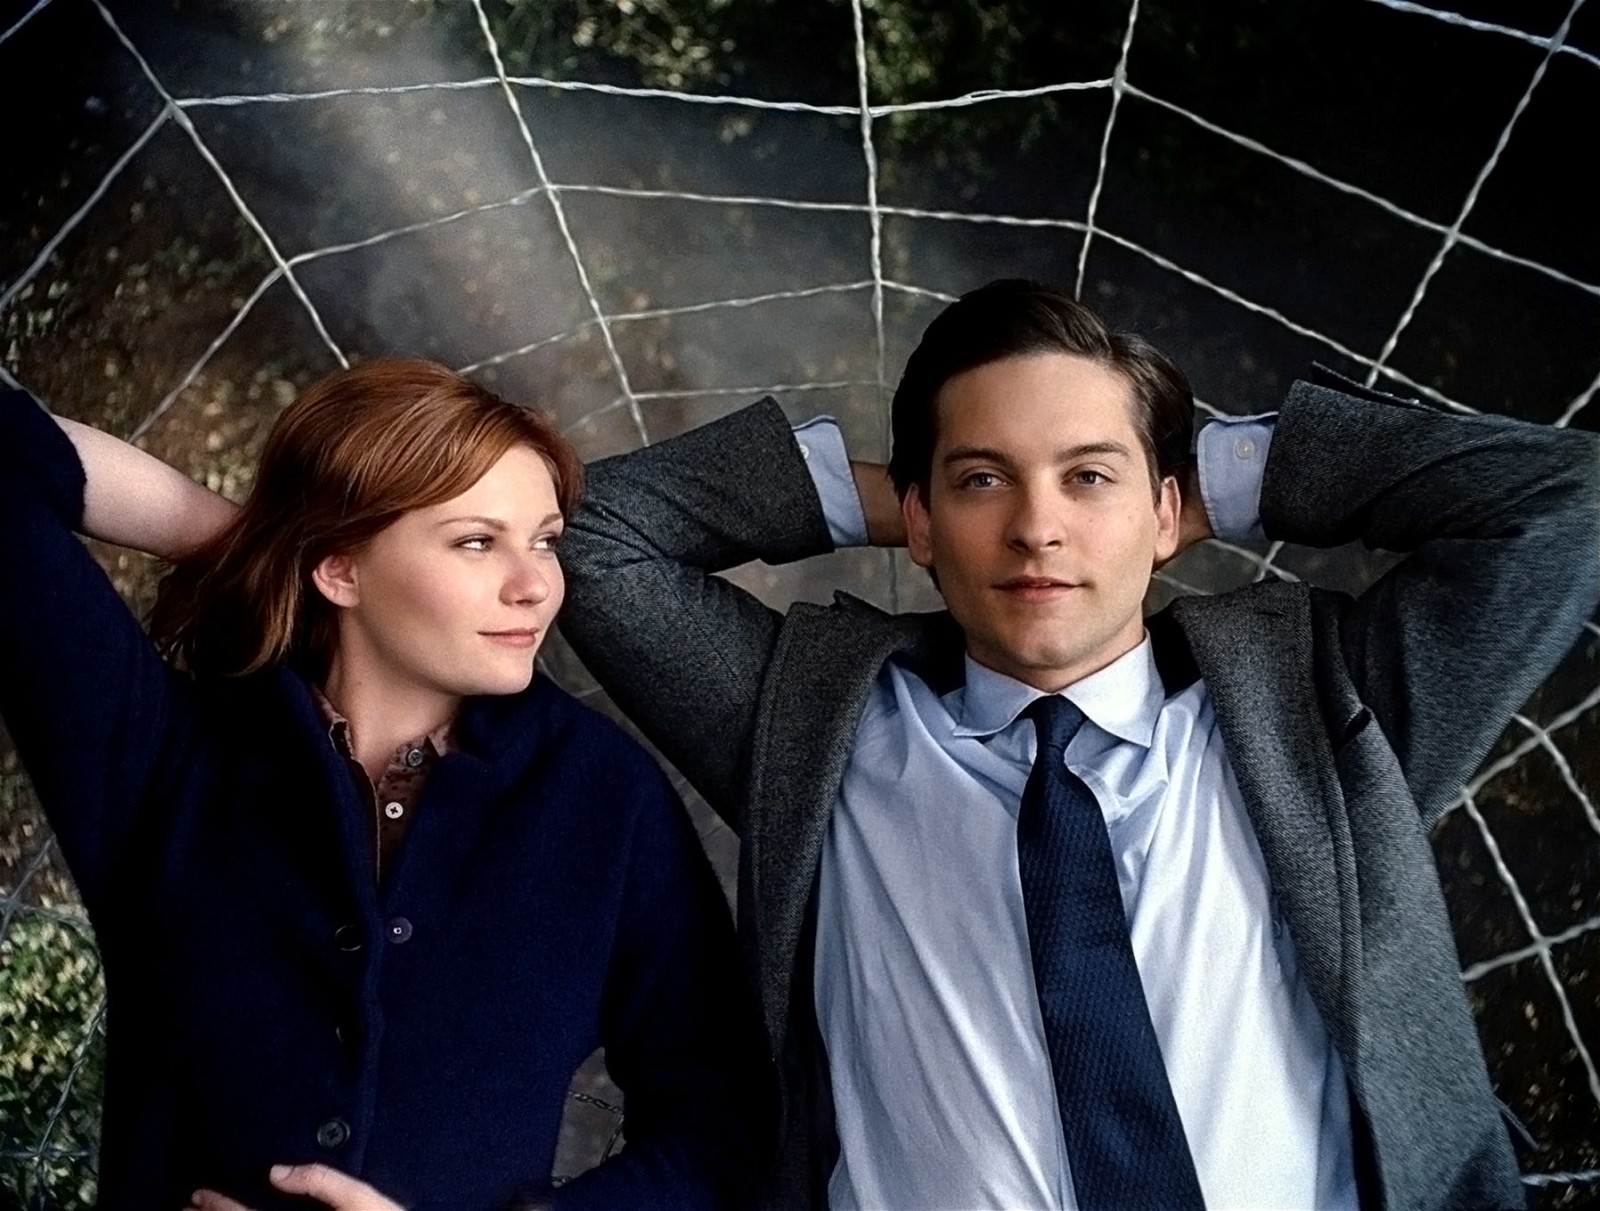 Kirsten Dunst and Tobey Maguire as MJ and Peter Parker